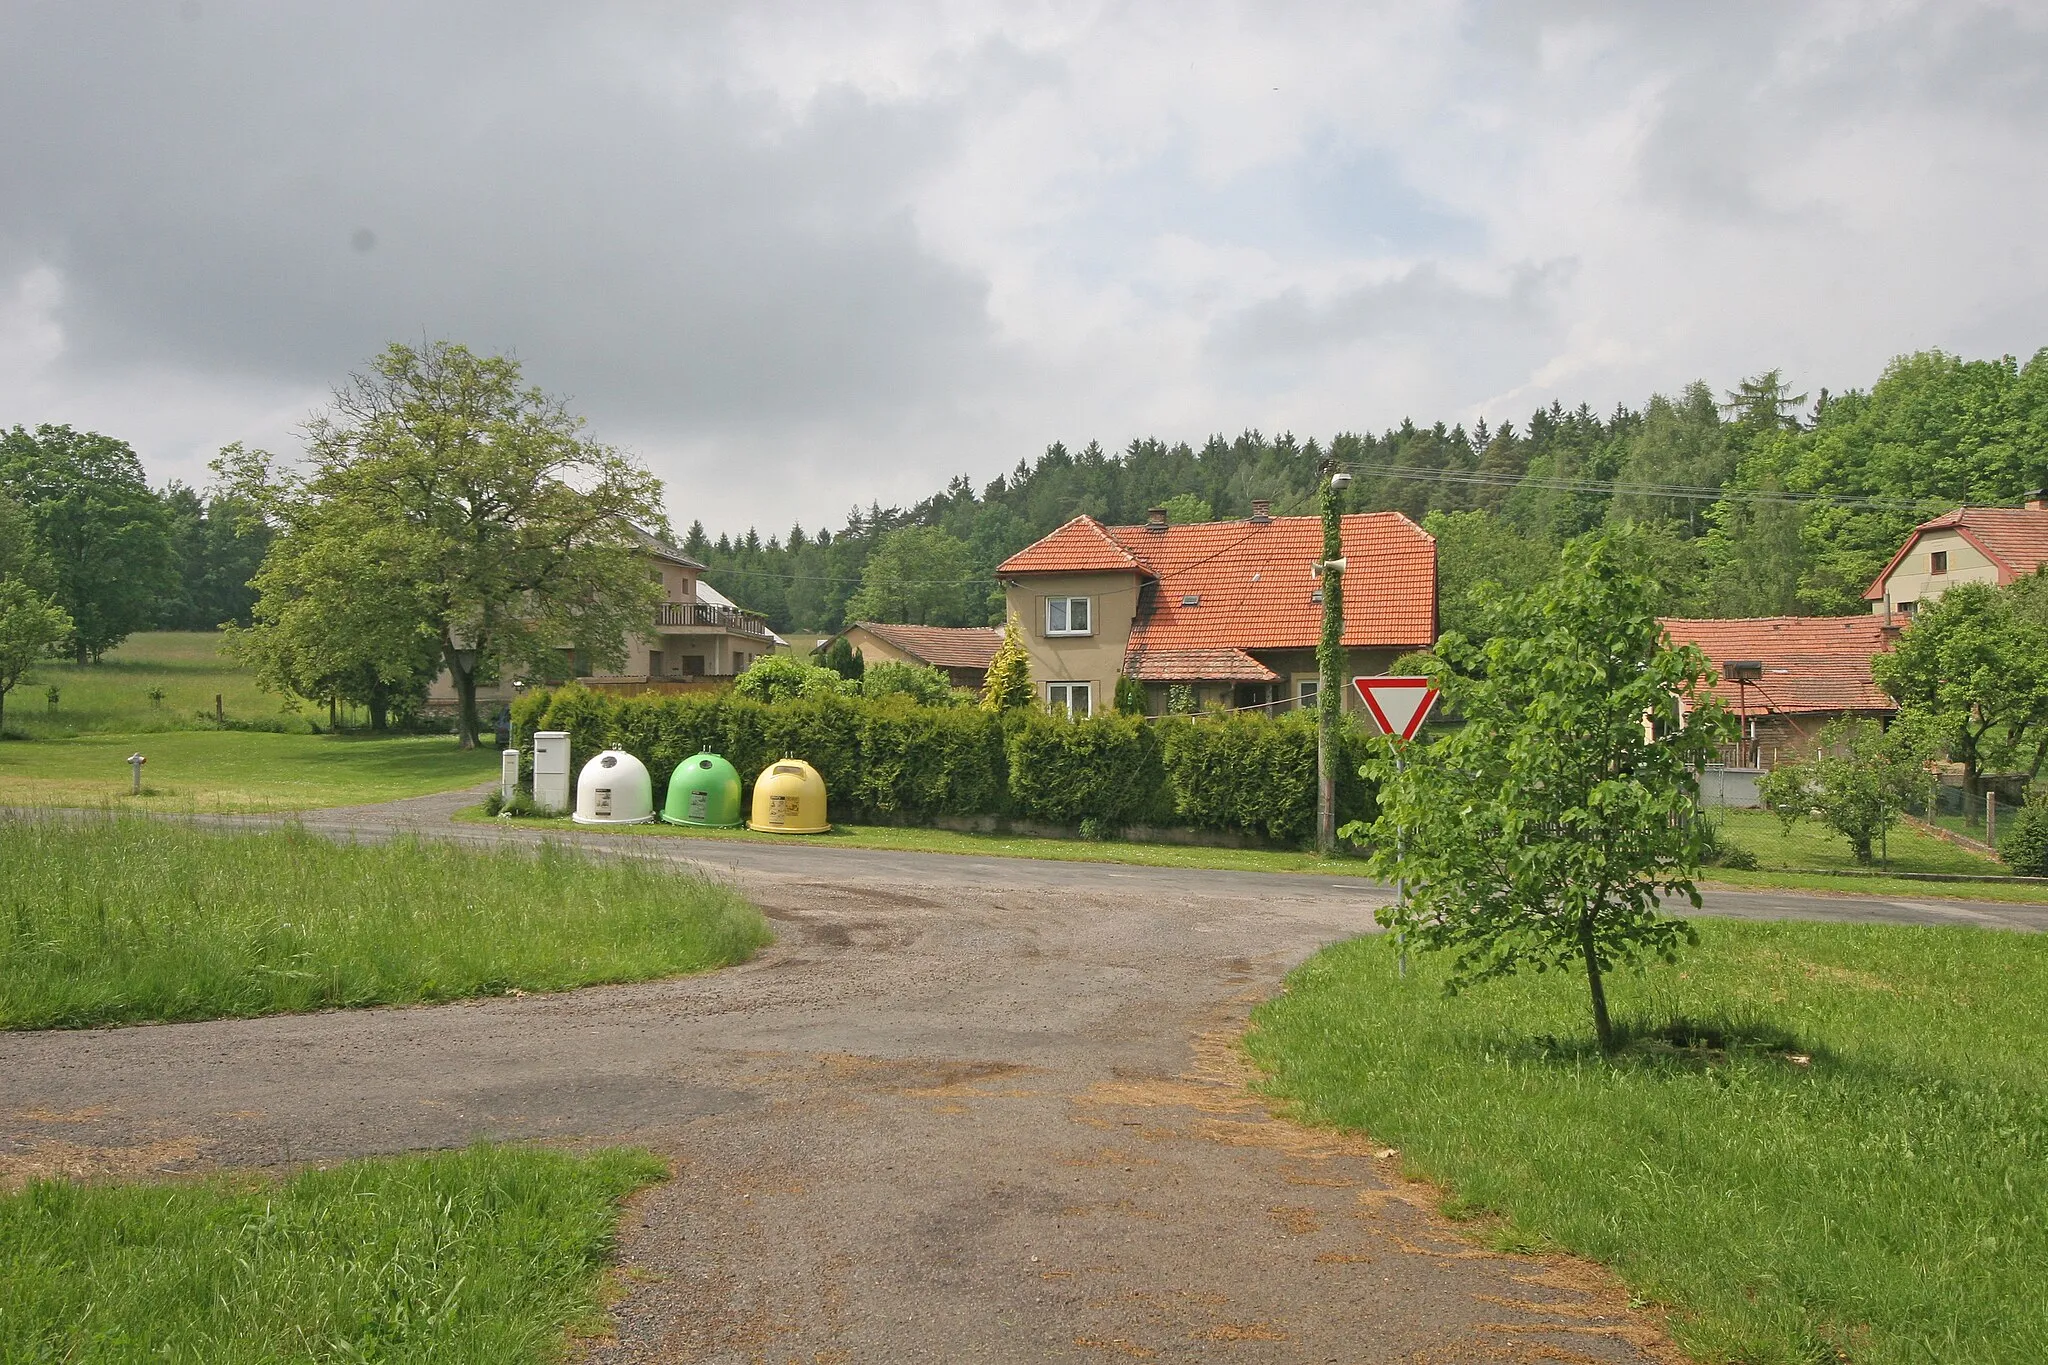 Photo showing: Rtenín čp. 9
Camera location 49° 52′ 35.05″ N, 15° 42′ 35.11″ E View this and other nearby images on: OpenStreetMap 49.876402;   15.709752

This file was created as a part of the photographic program of Wikimedia Czech Republic. Project: Foto českých obcí The program supports Wikimedia Commons photographers in the Czech Republic.